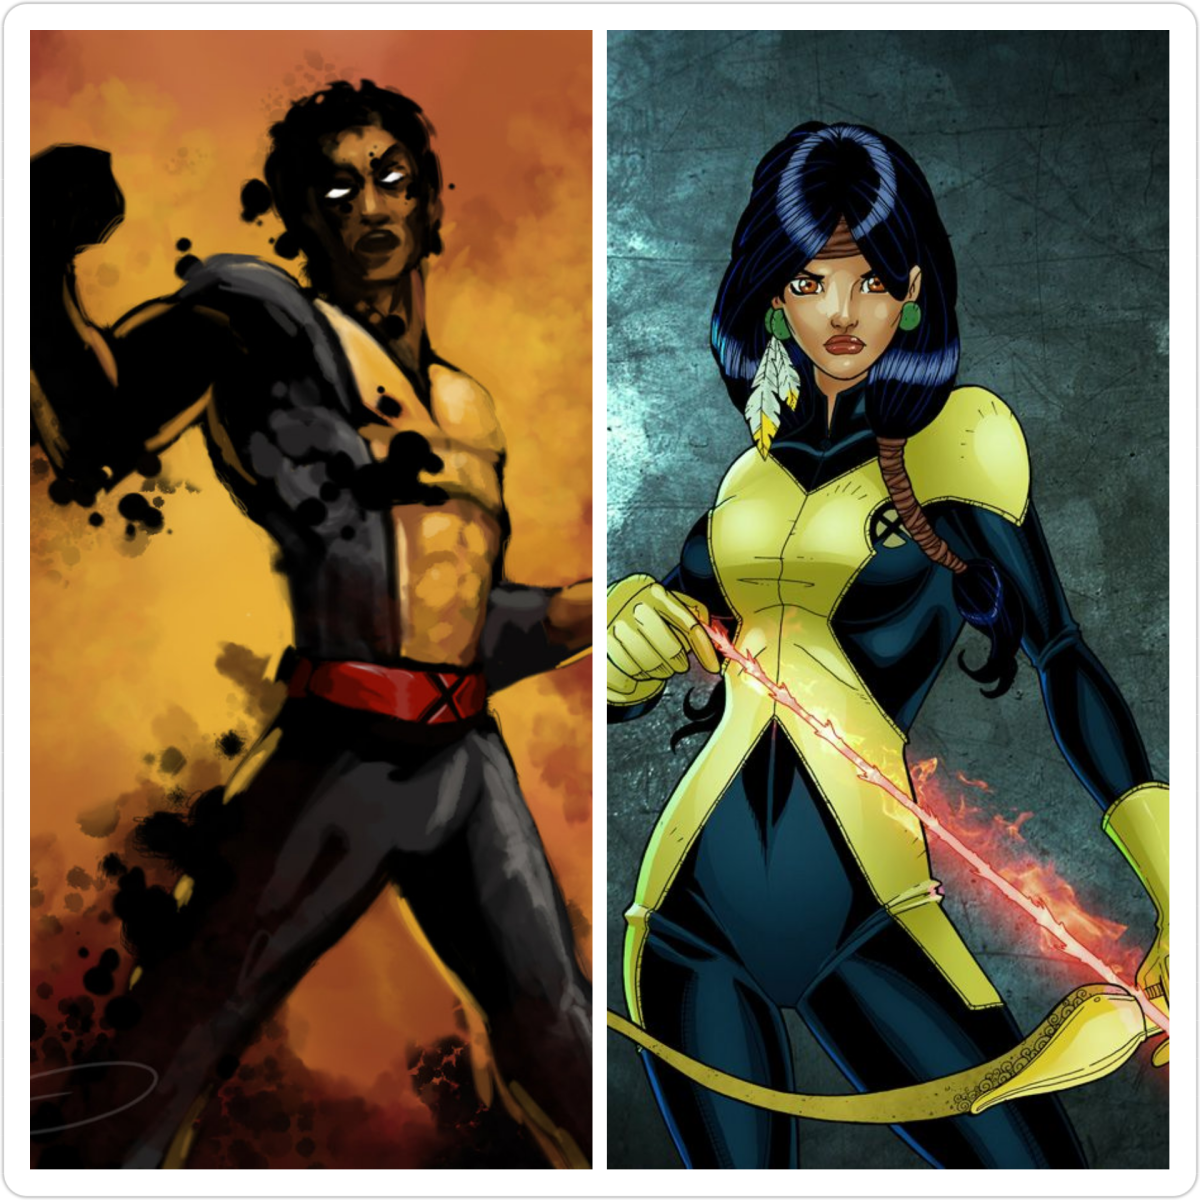 “X-Men Spinoff, “New Mutants'” Movie Cast Sunspot & Moonstar, Amidst Accusations of Whitewashing!